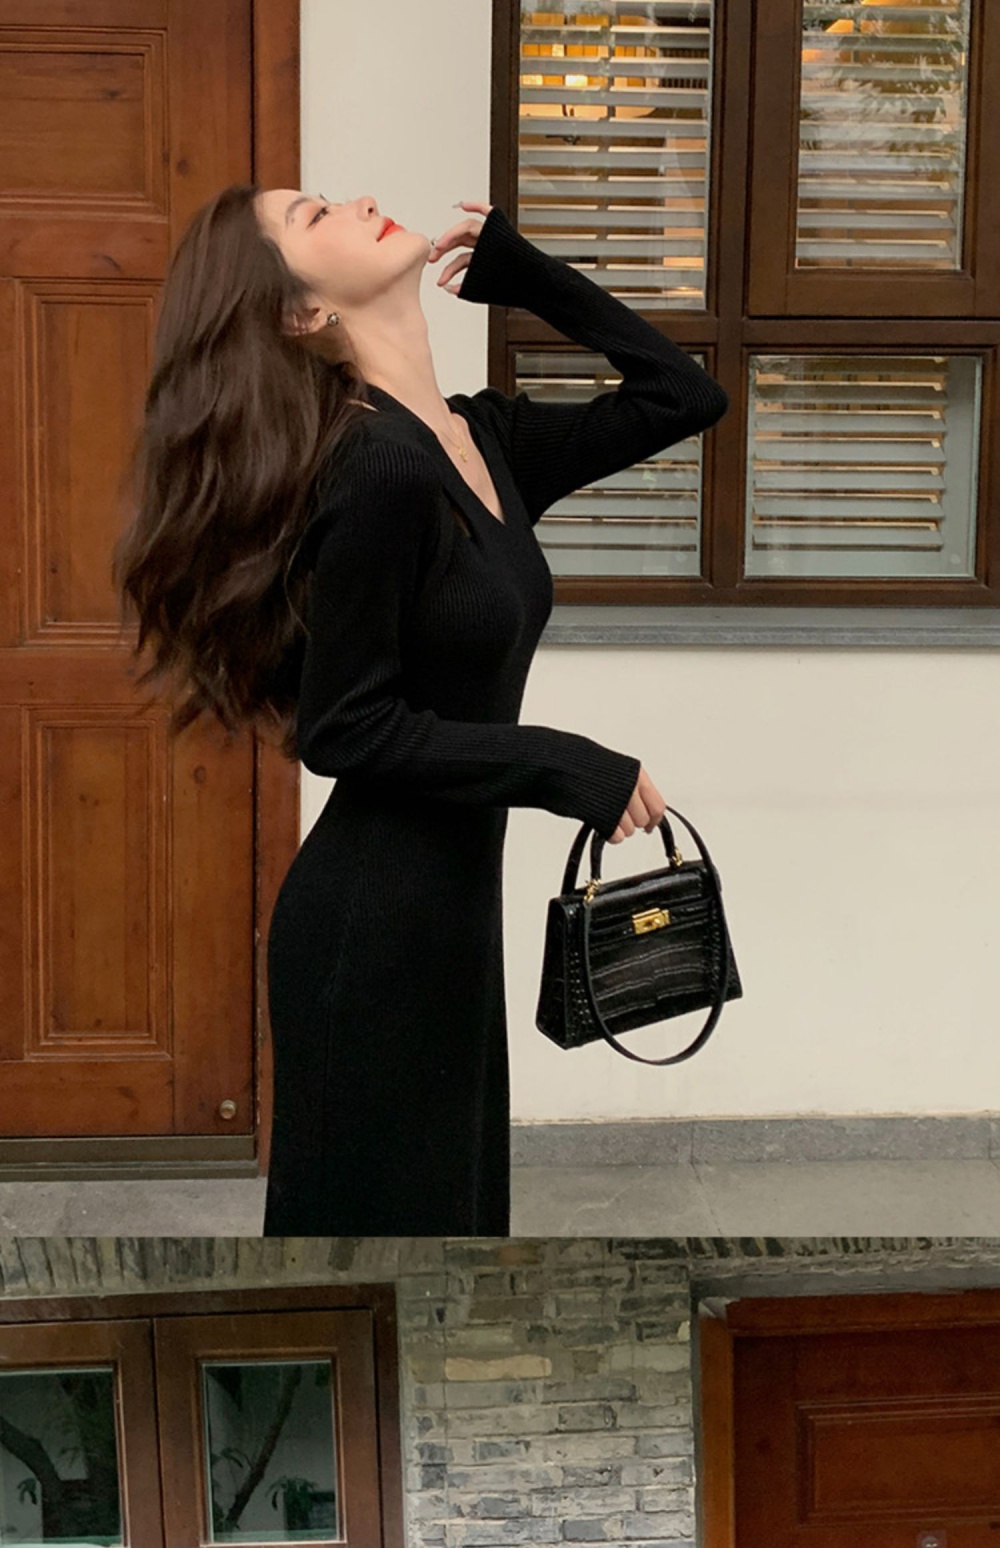 Autumn and winter bottoming sweater slim dress for women